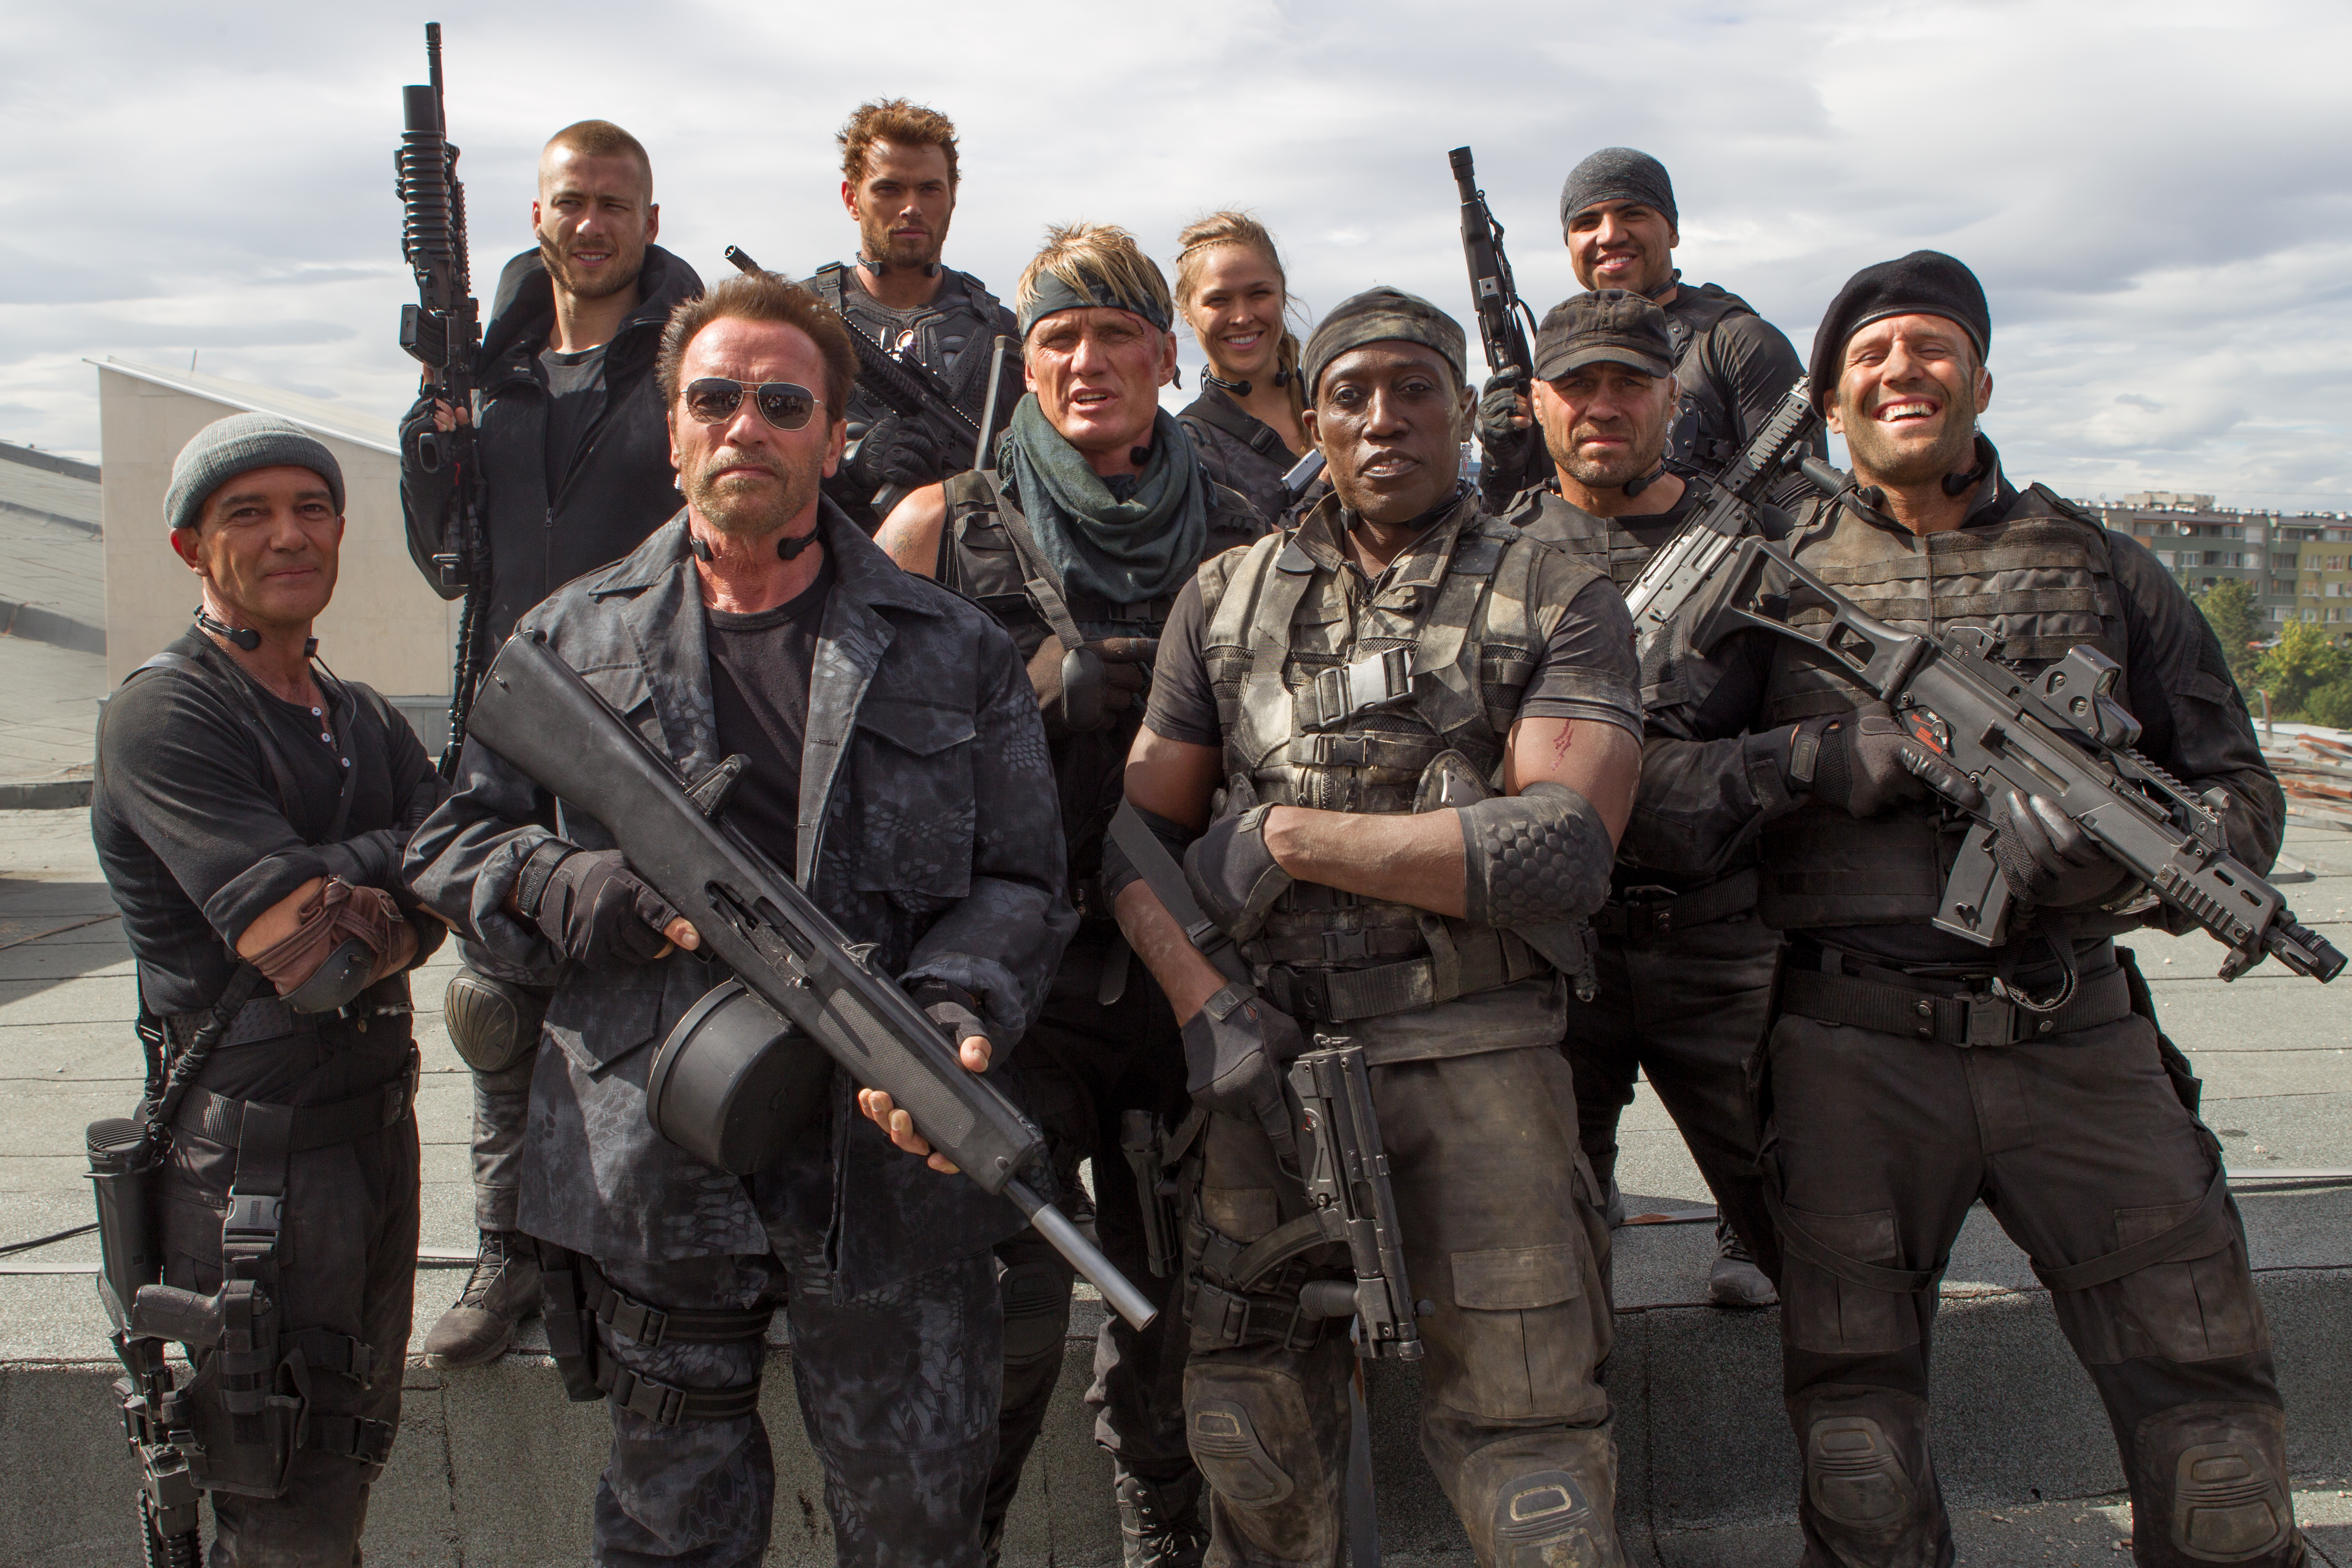 wallpapers wesley snipes, the expendables 3, movie, antonio banderas, arnold schwarzenegger, dolph lundgren, glen powell, jason statham, kellan lutz, randy couture, terry crews, victor ortiz, the expendables